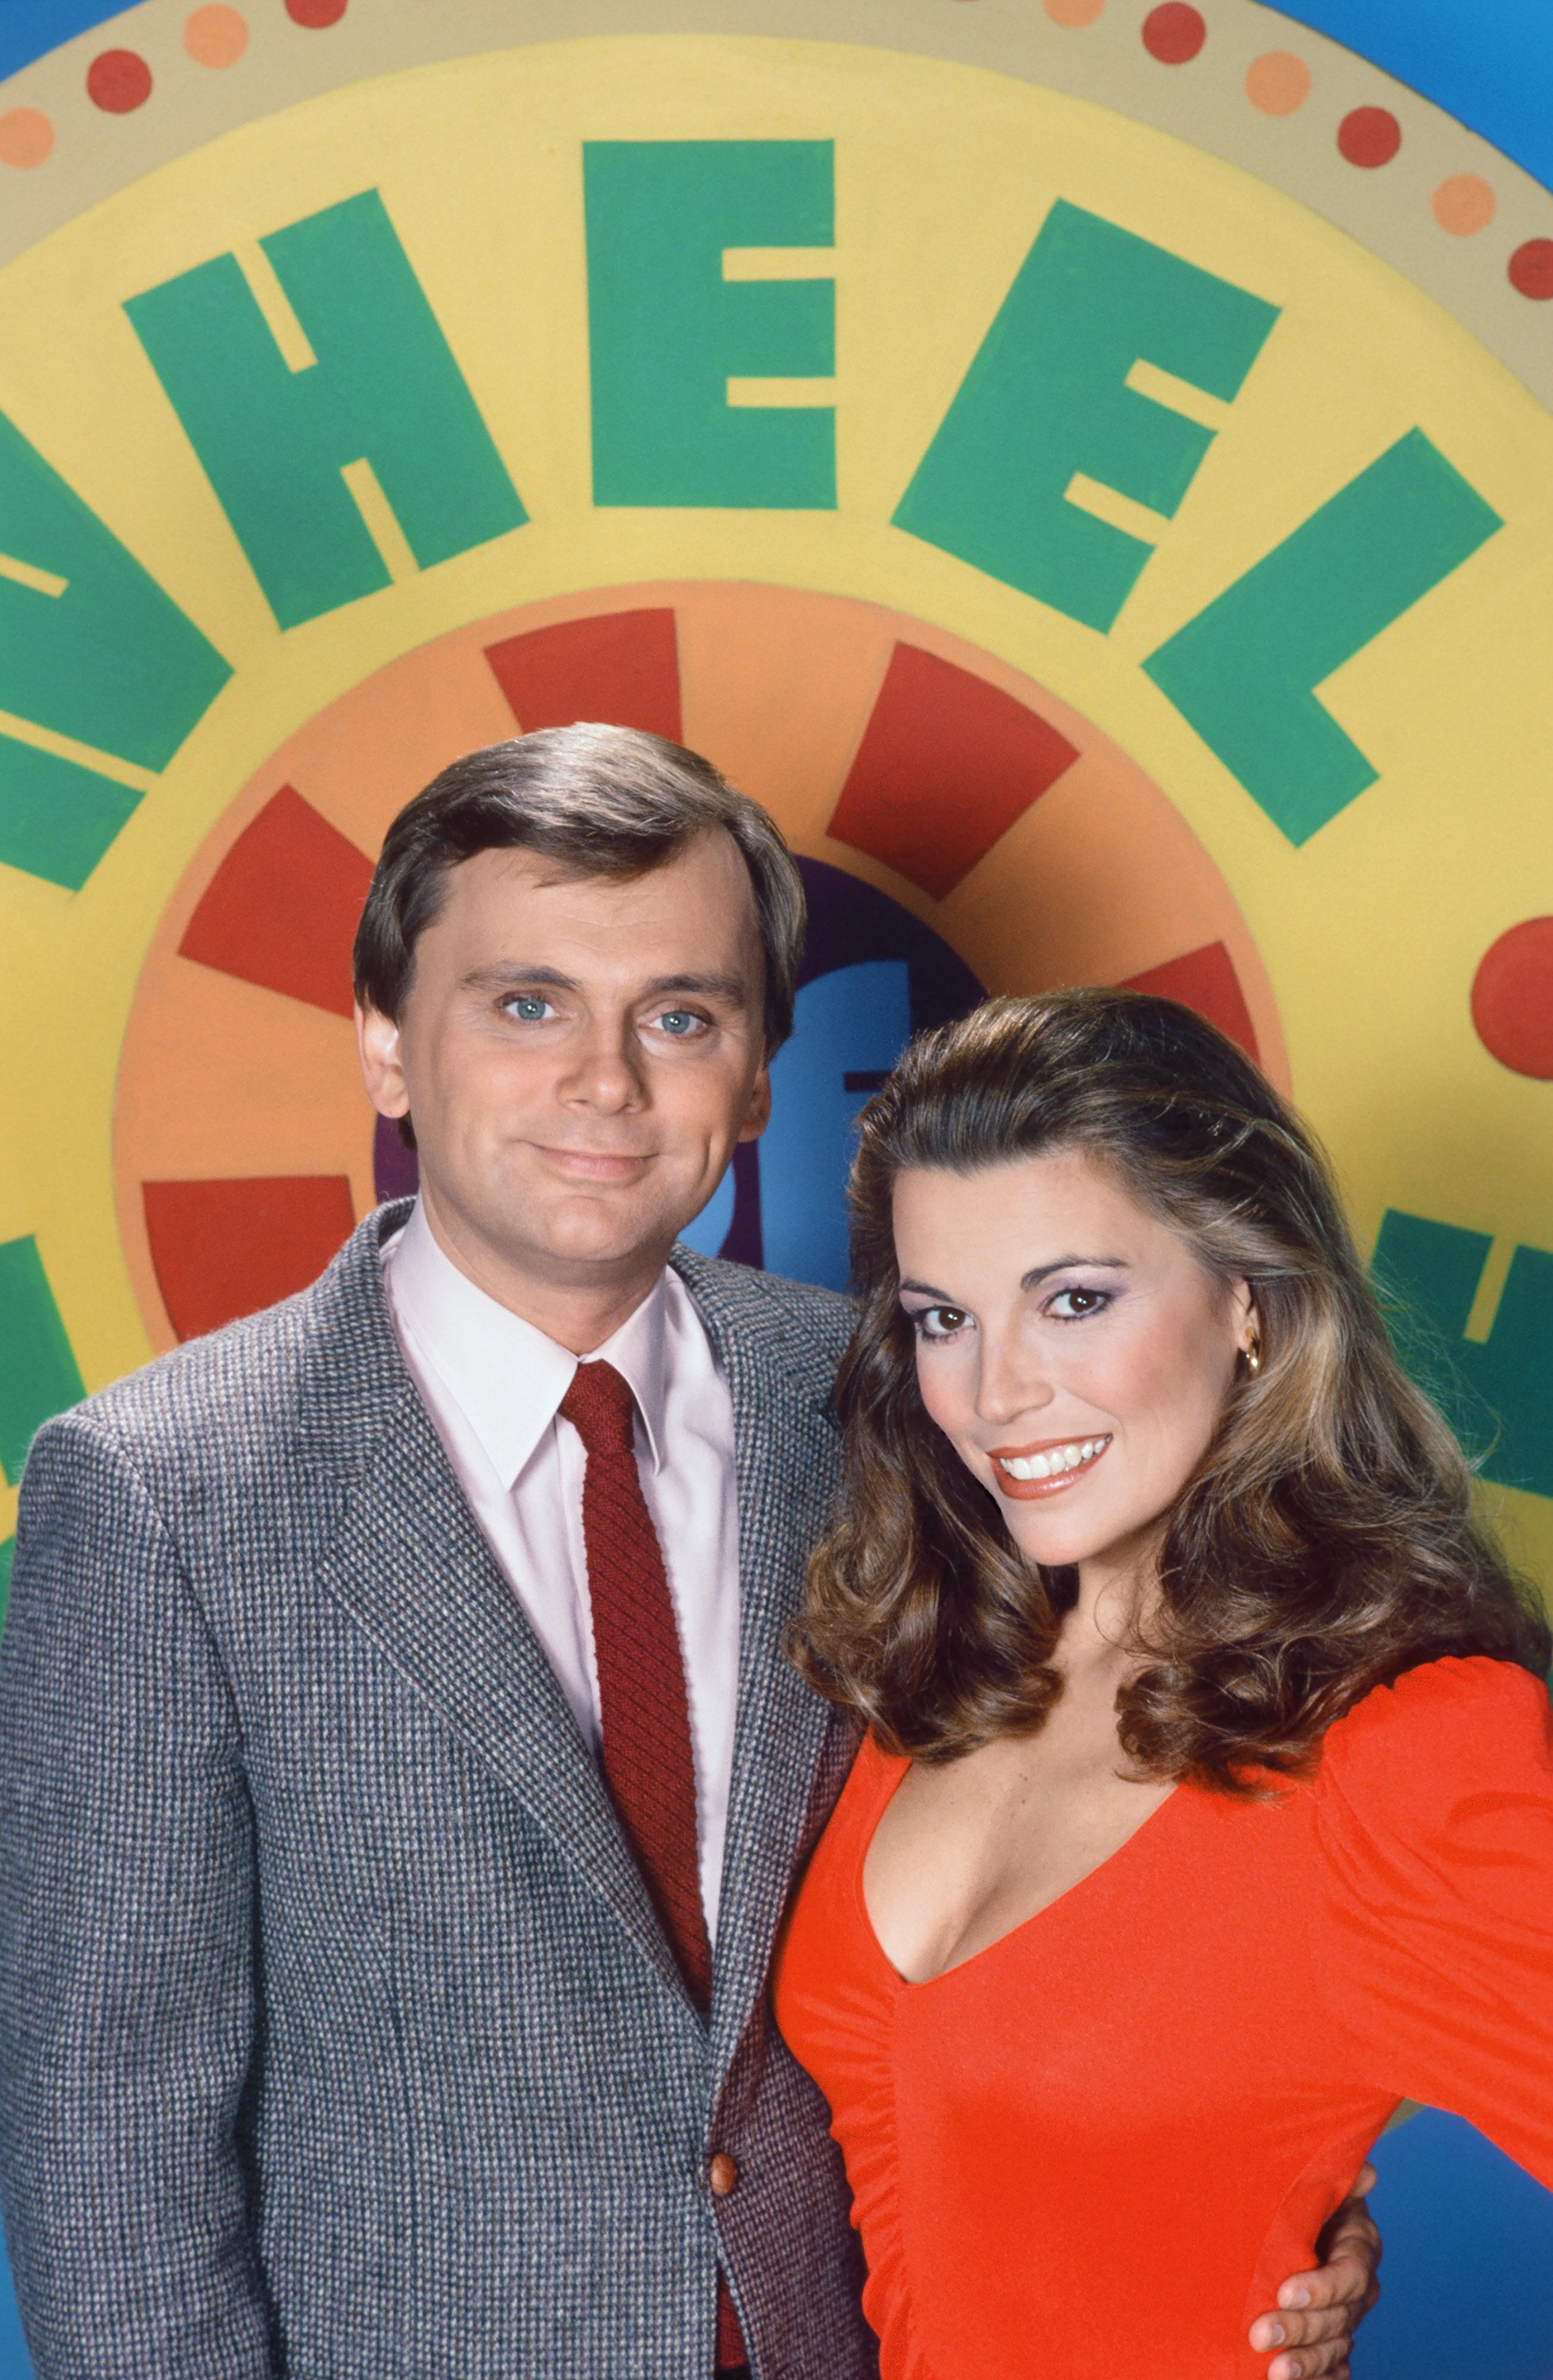 Pat Sajak and Vanna White in the set of "Wheel of Fortune," 1992 | Source: Getty Images